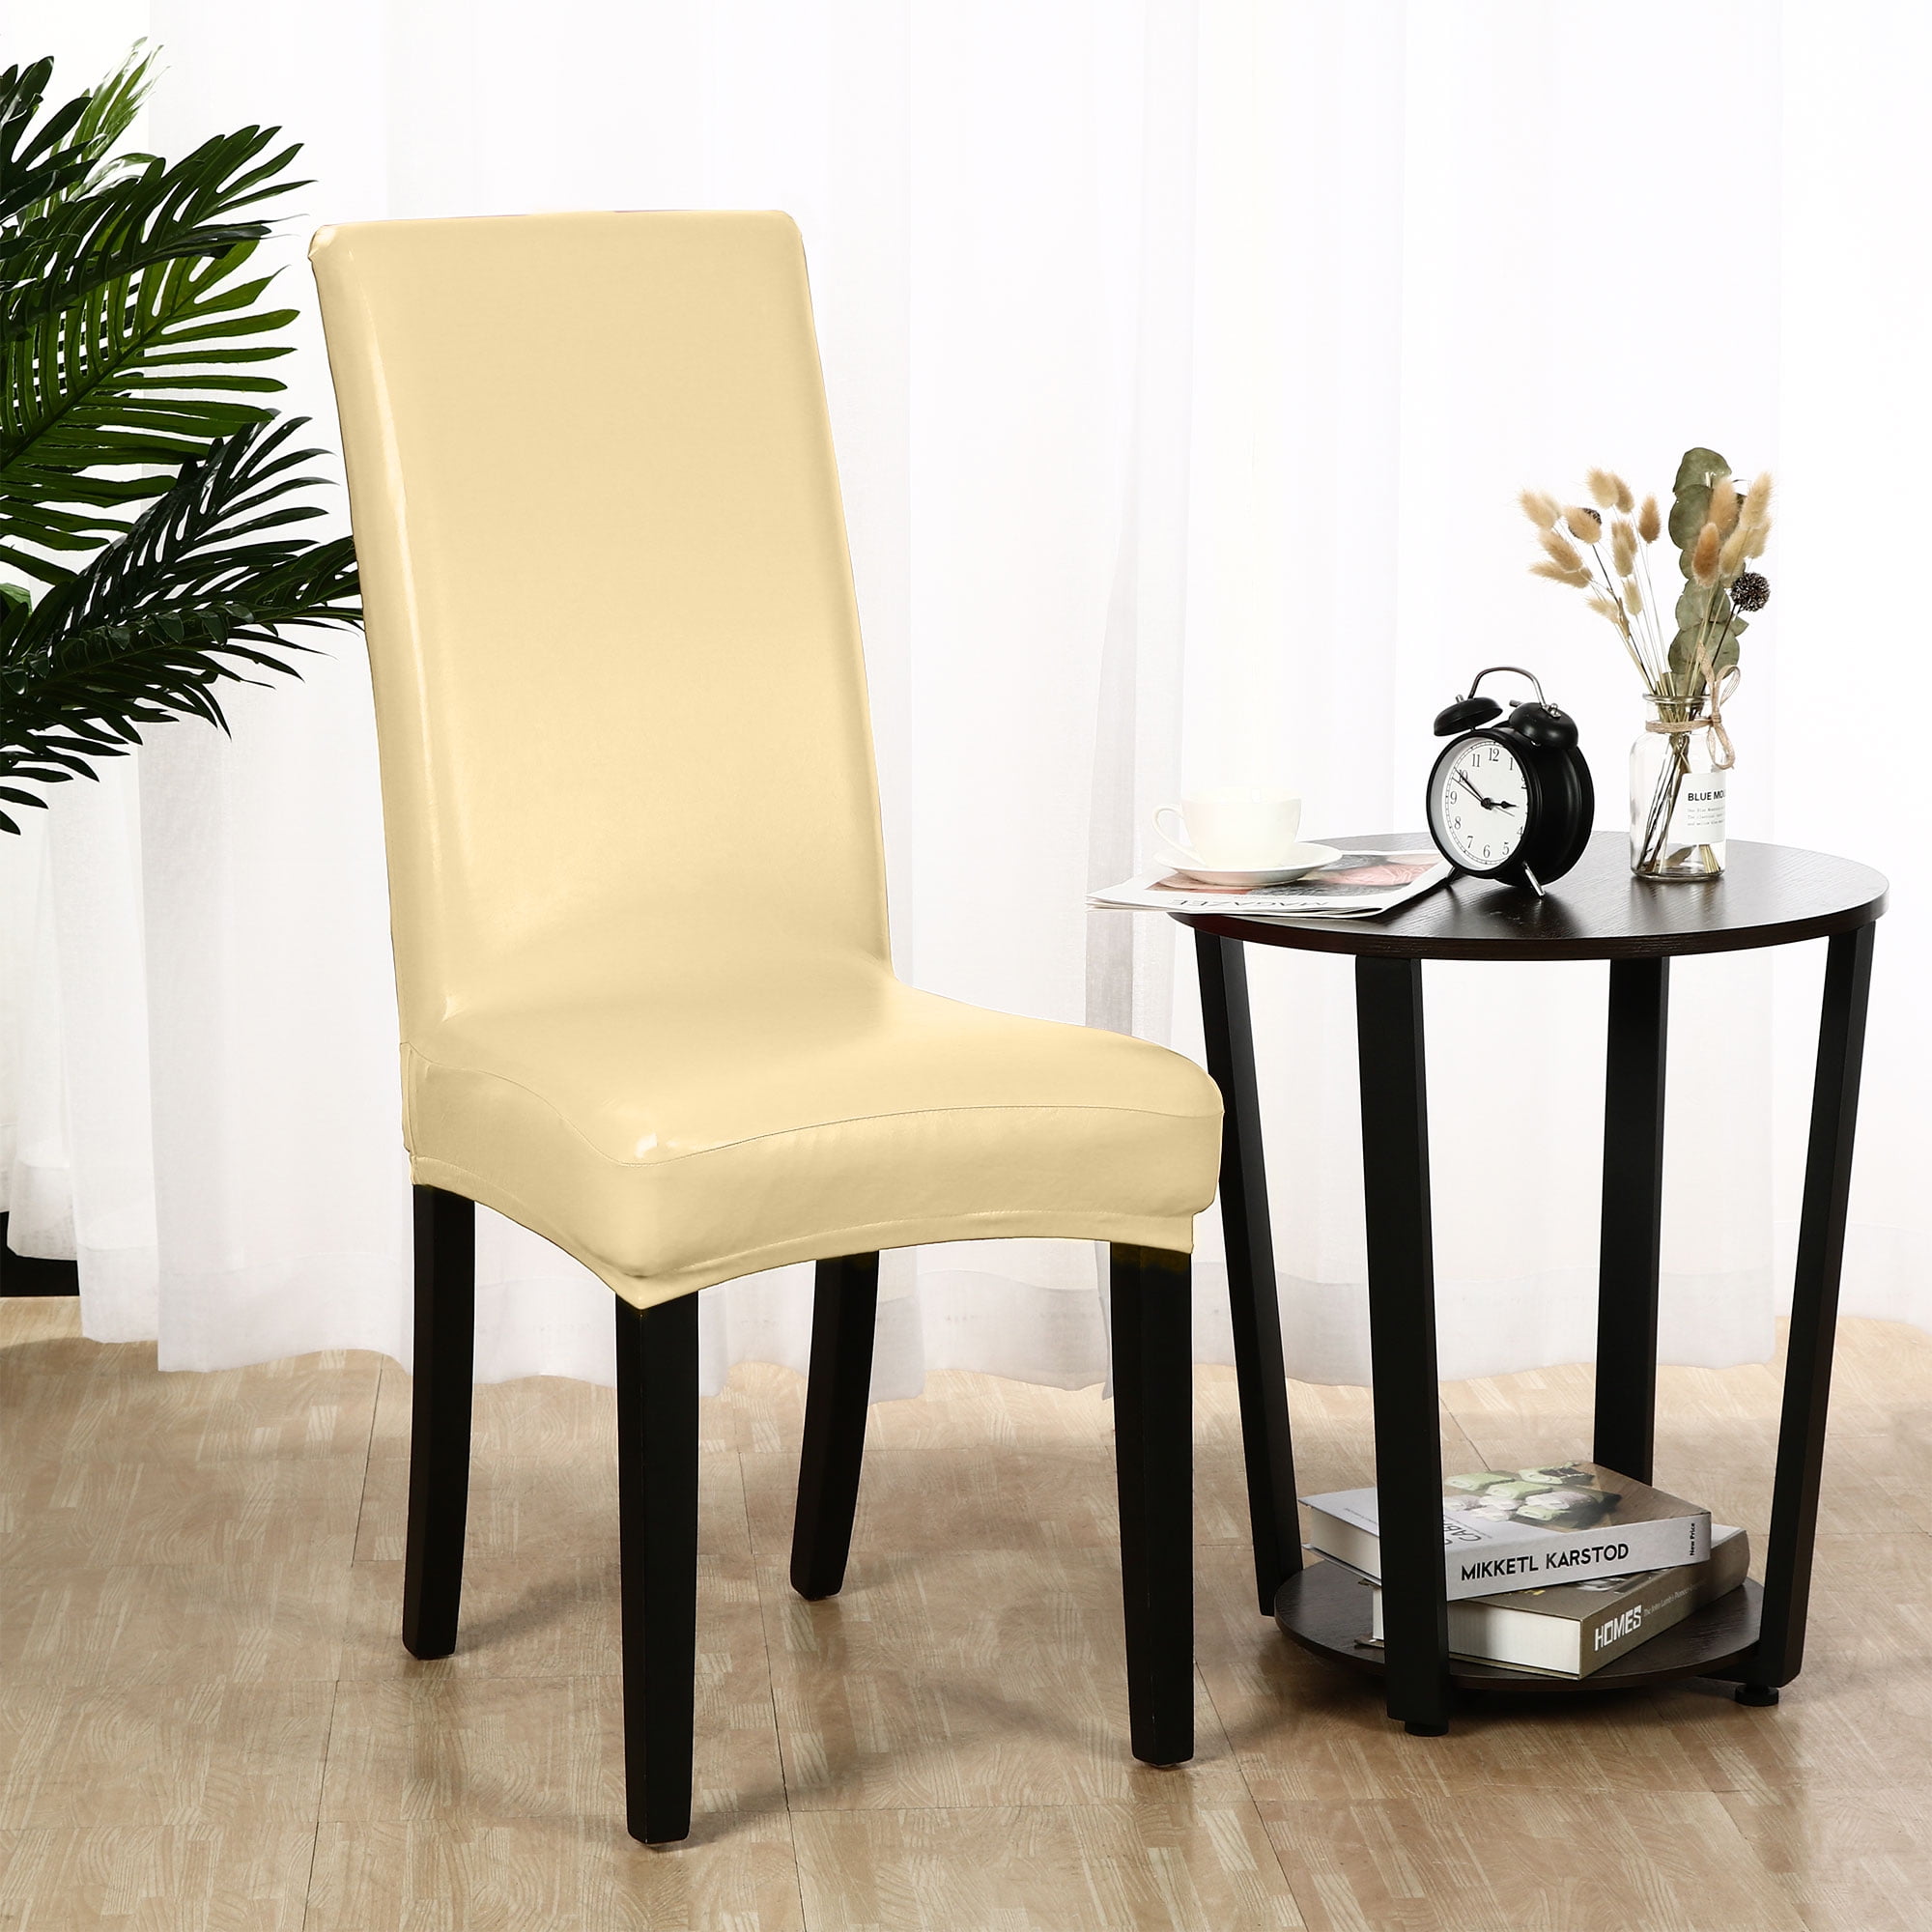 Artificial Pu Leather Dining Chair Seat, Faux Leather Dining Chair Seat Covers